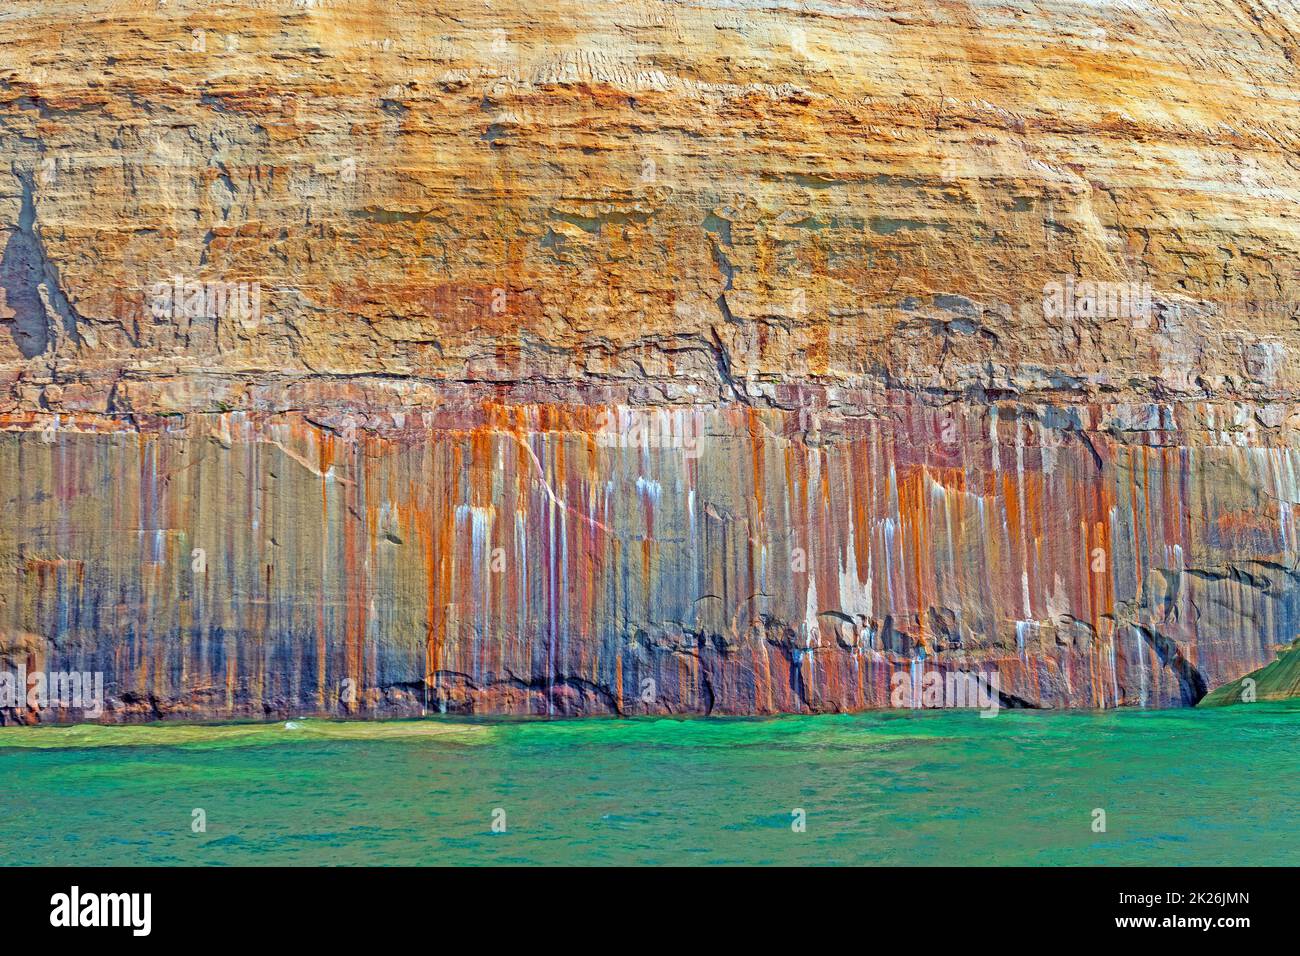 Colorful Minerals Leaching Through the Sandstone in Pictured Rocks National Lakeshore on Lake Superior in Michigan Stock Photo